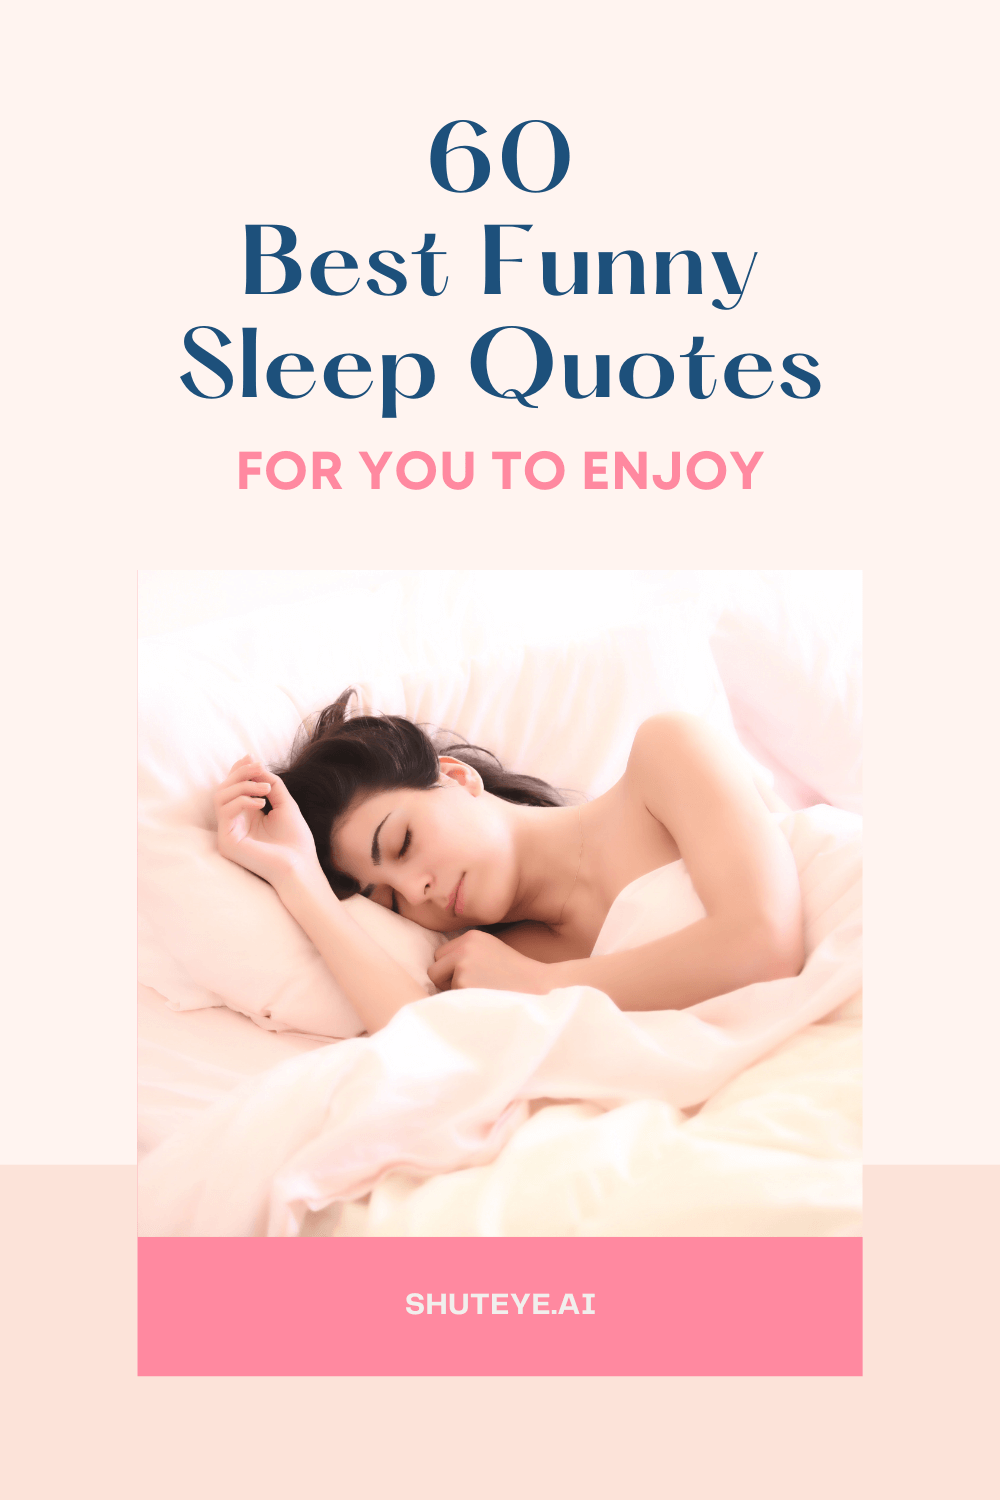 60 Best Funny Sleep Quotes for You to Enjoy